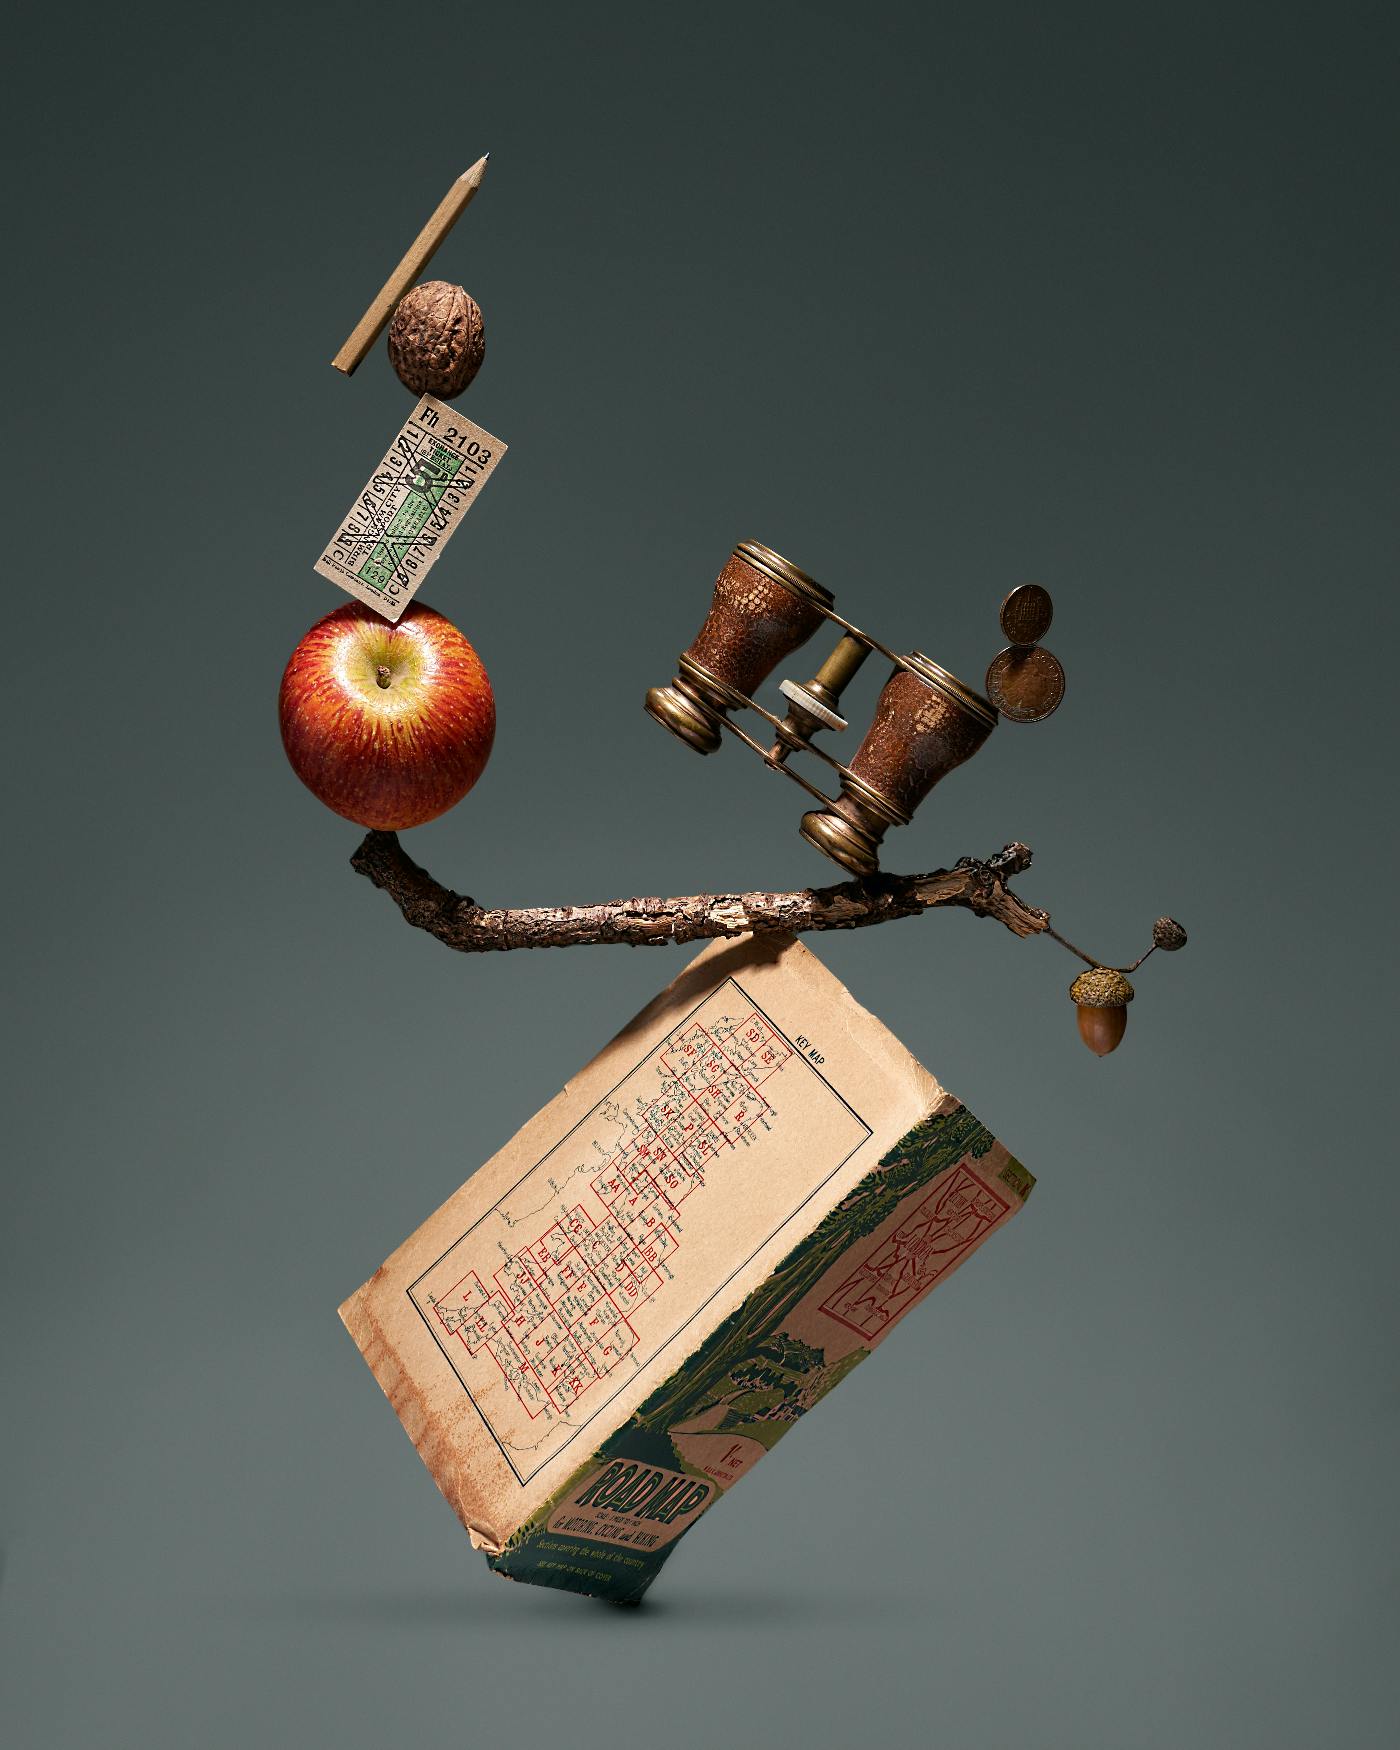 A pencil, walnut, apple, twig, opera glasses and a road map all tumbling together